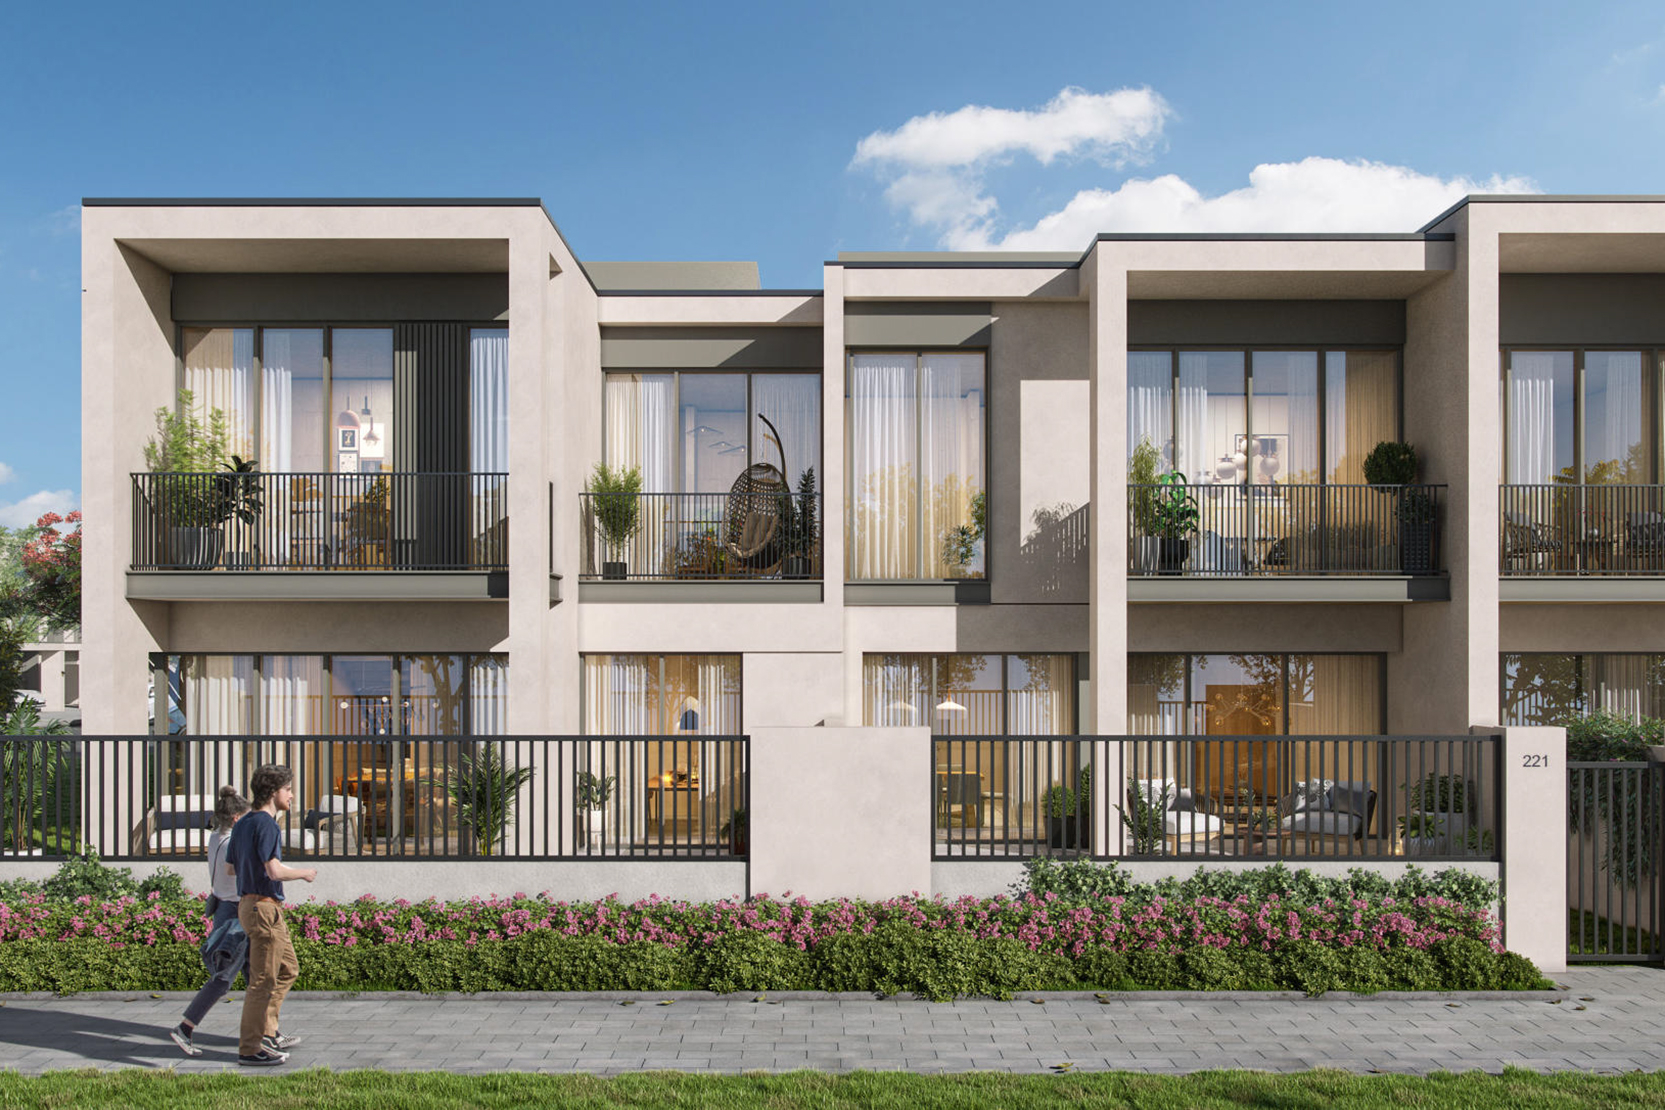 Gallery Shams Townhouses